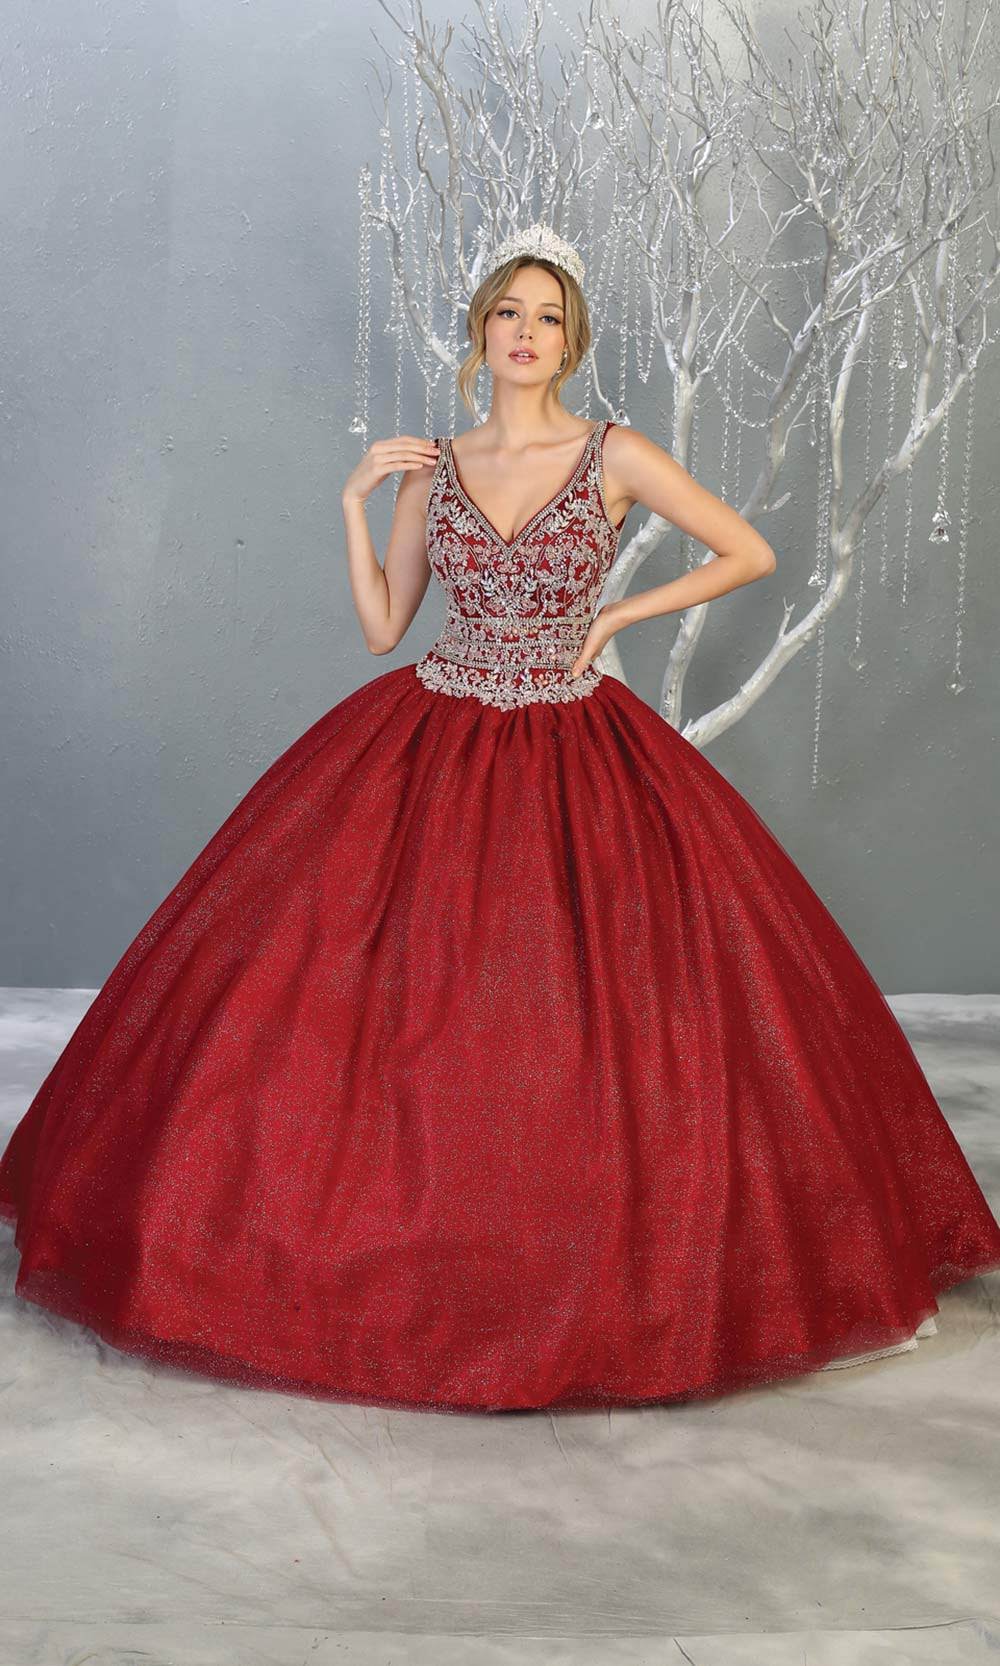 Mayqueen LK143 burgundy red quinceanera ball gown w_ wide straps & beading. This dark red ball gown is perfect for engagement dress, wedding reception, ind